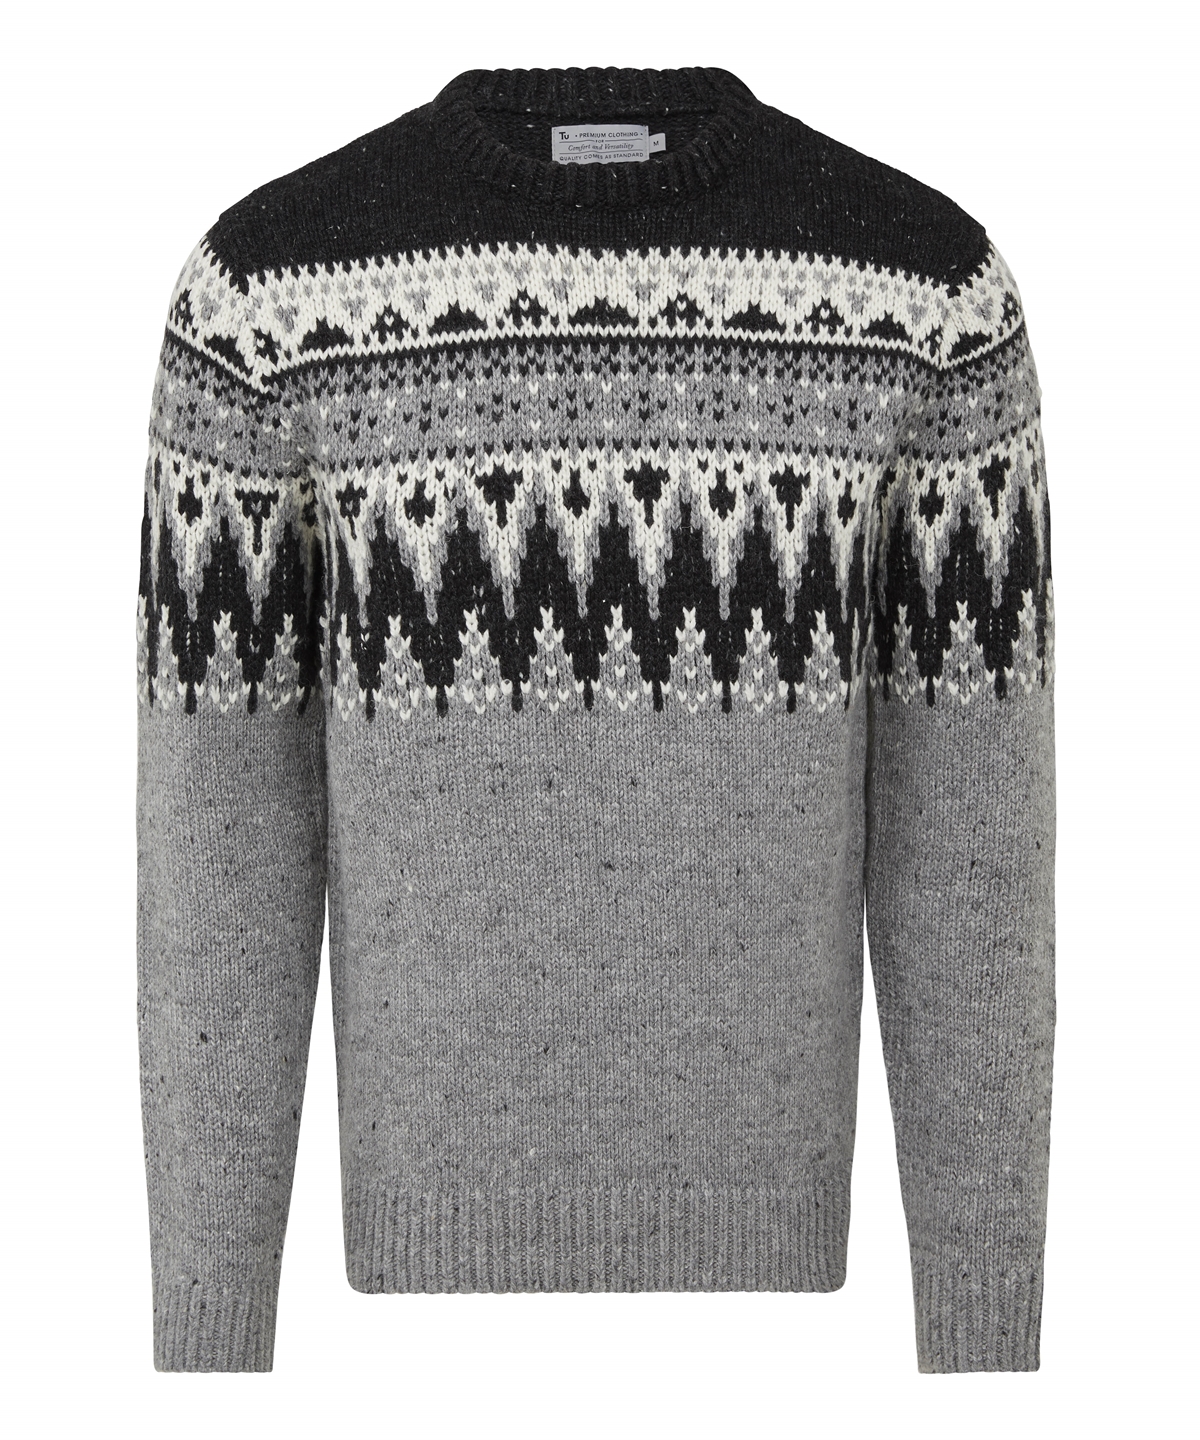 14 Best Christmas Jumpers for Him and Her - STYLEetc.